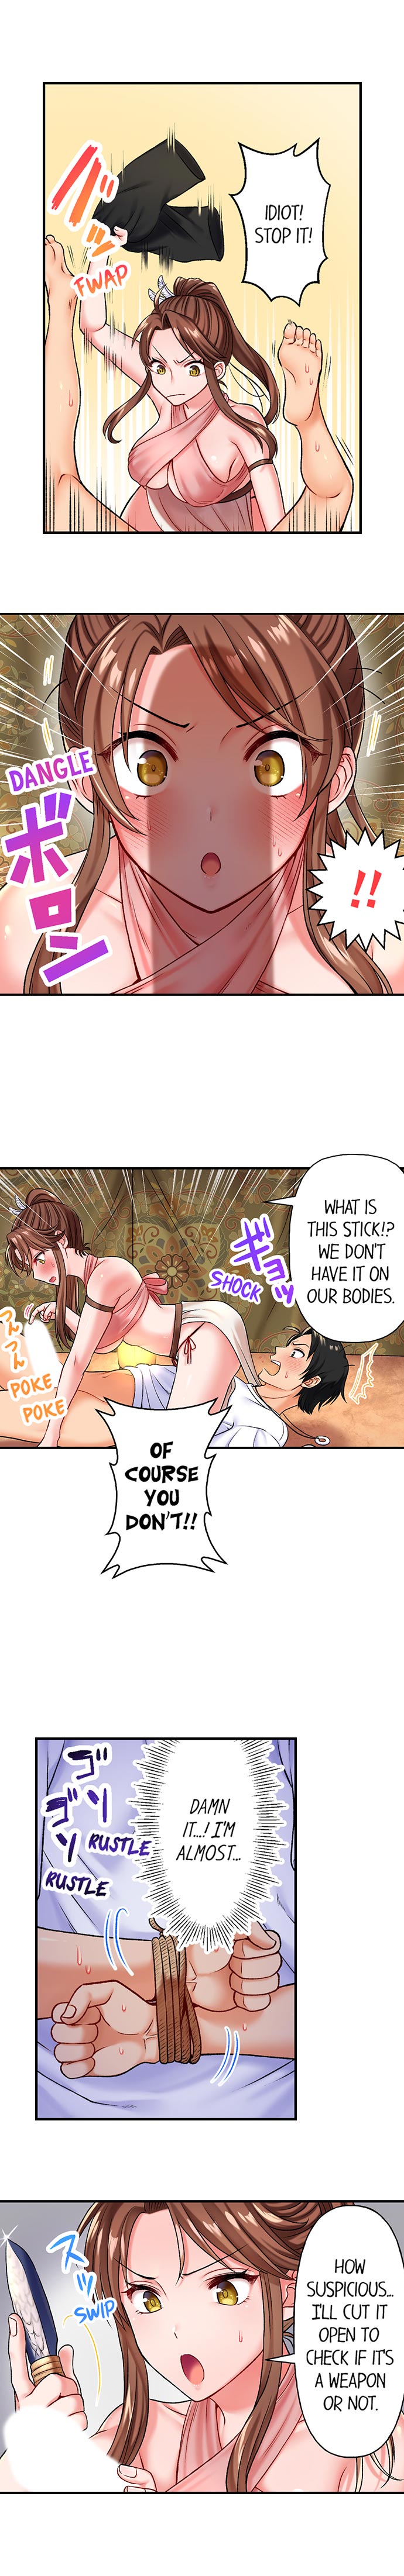 Girls' Island: Only I Can Fuck Them All! - Chapter 1 Page 9